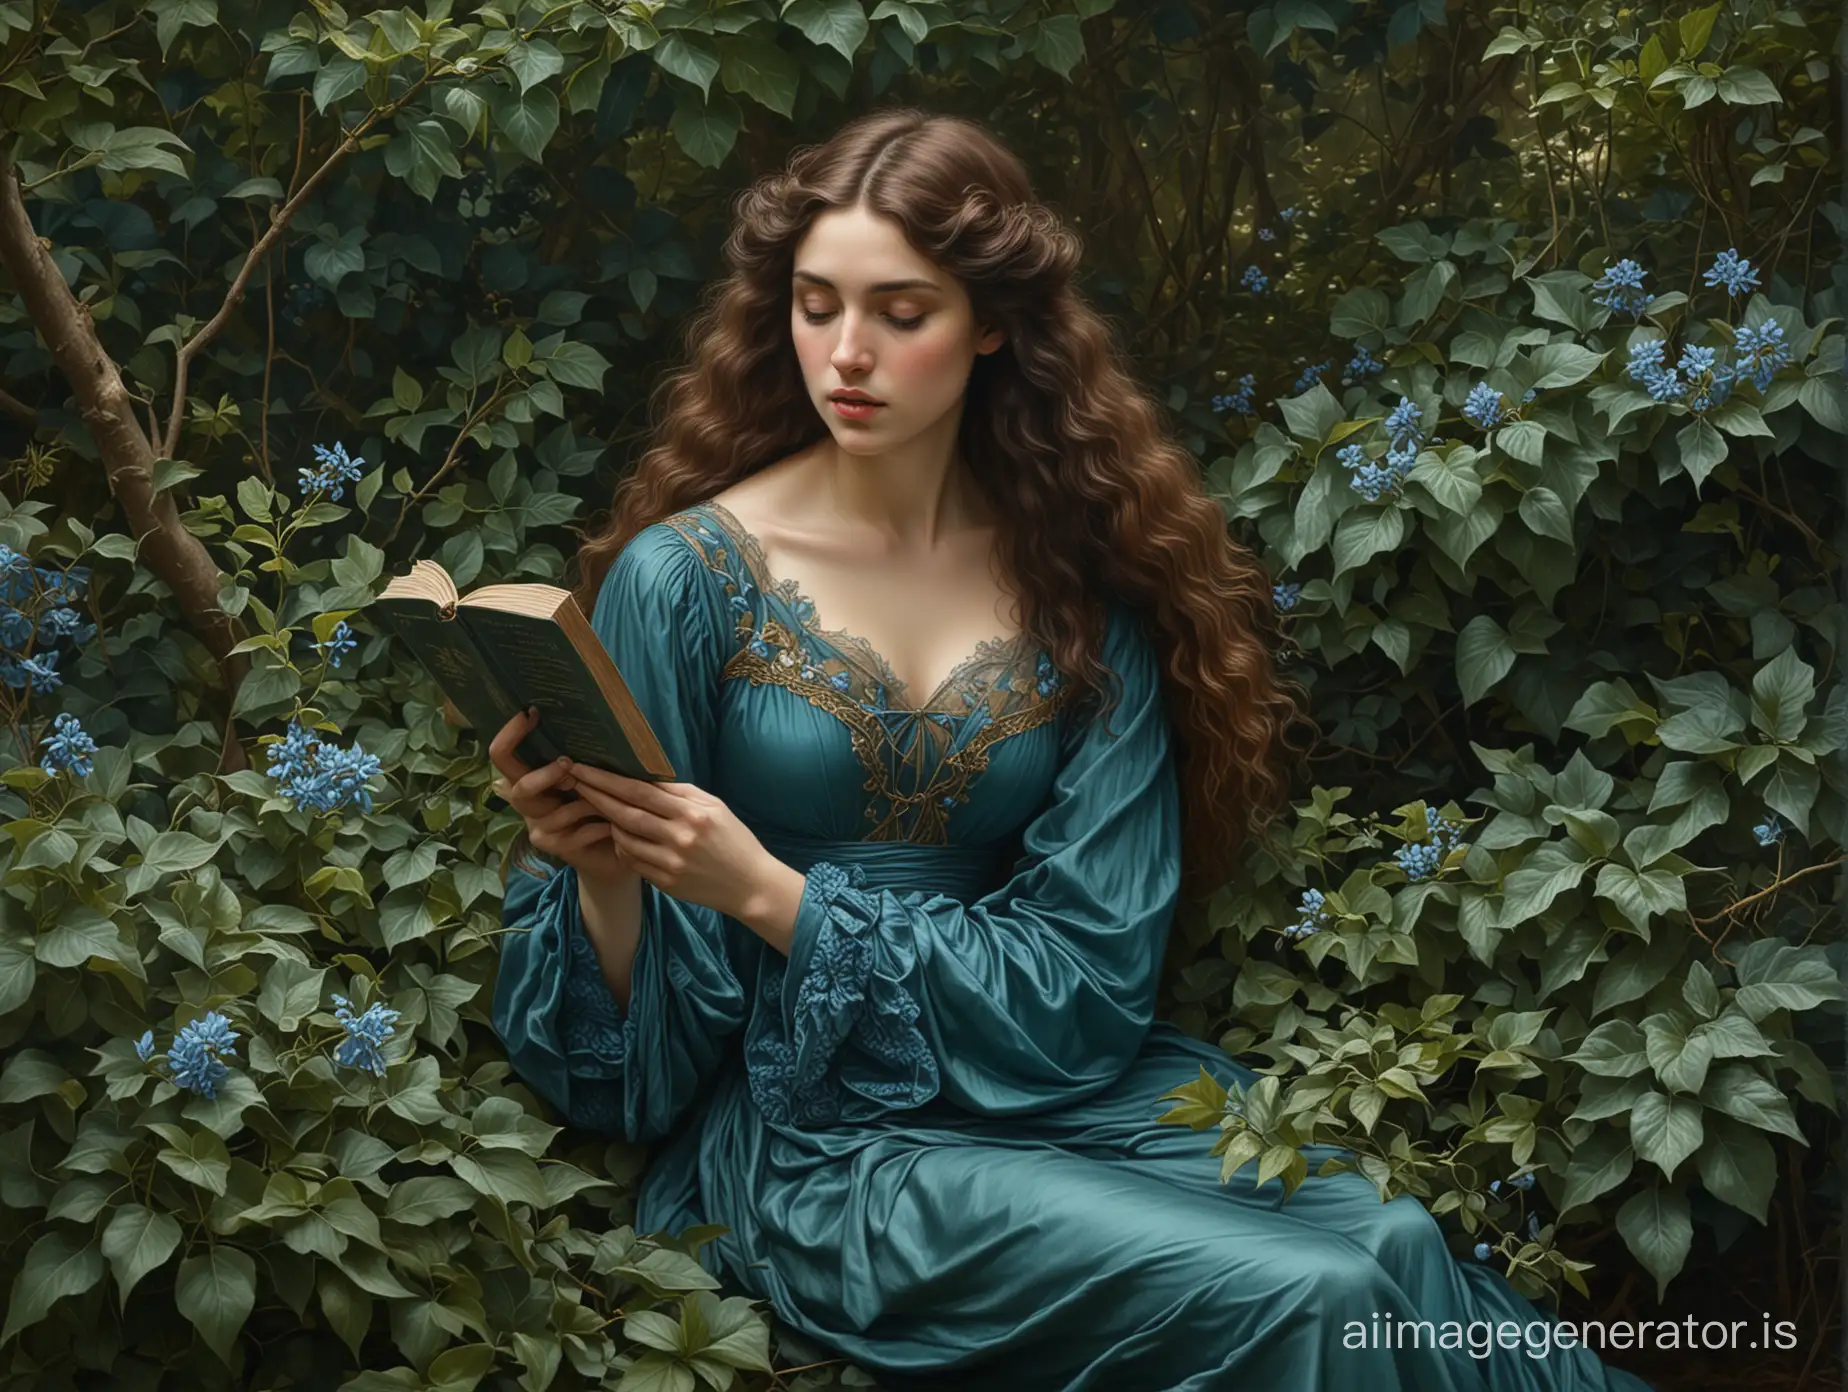 masterpiece, pre-raphaelity paintings, a young women sits in a thicket of hedera, full body, dark hair, diagonal angle, dress of dark turquoise  color, open book, clematis flower in hand, botanical hyperrealism, complex lighting, artist`s style Dante Gabriel Rossetti